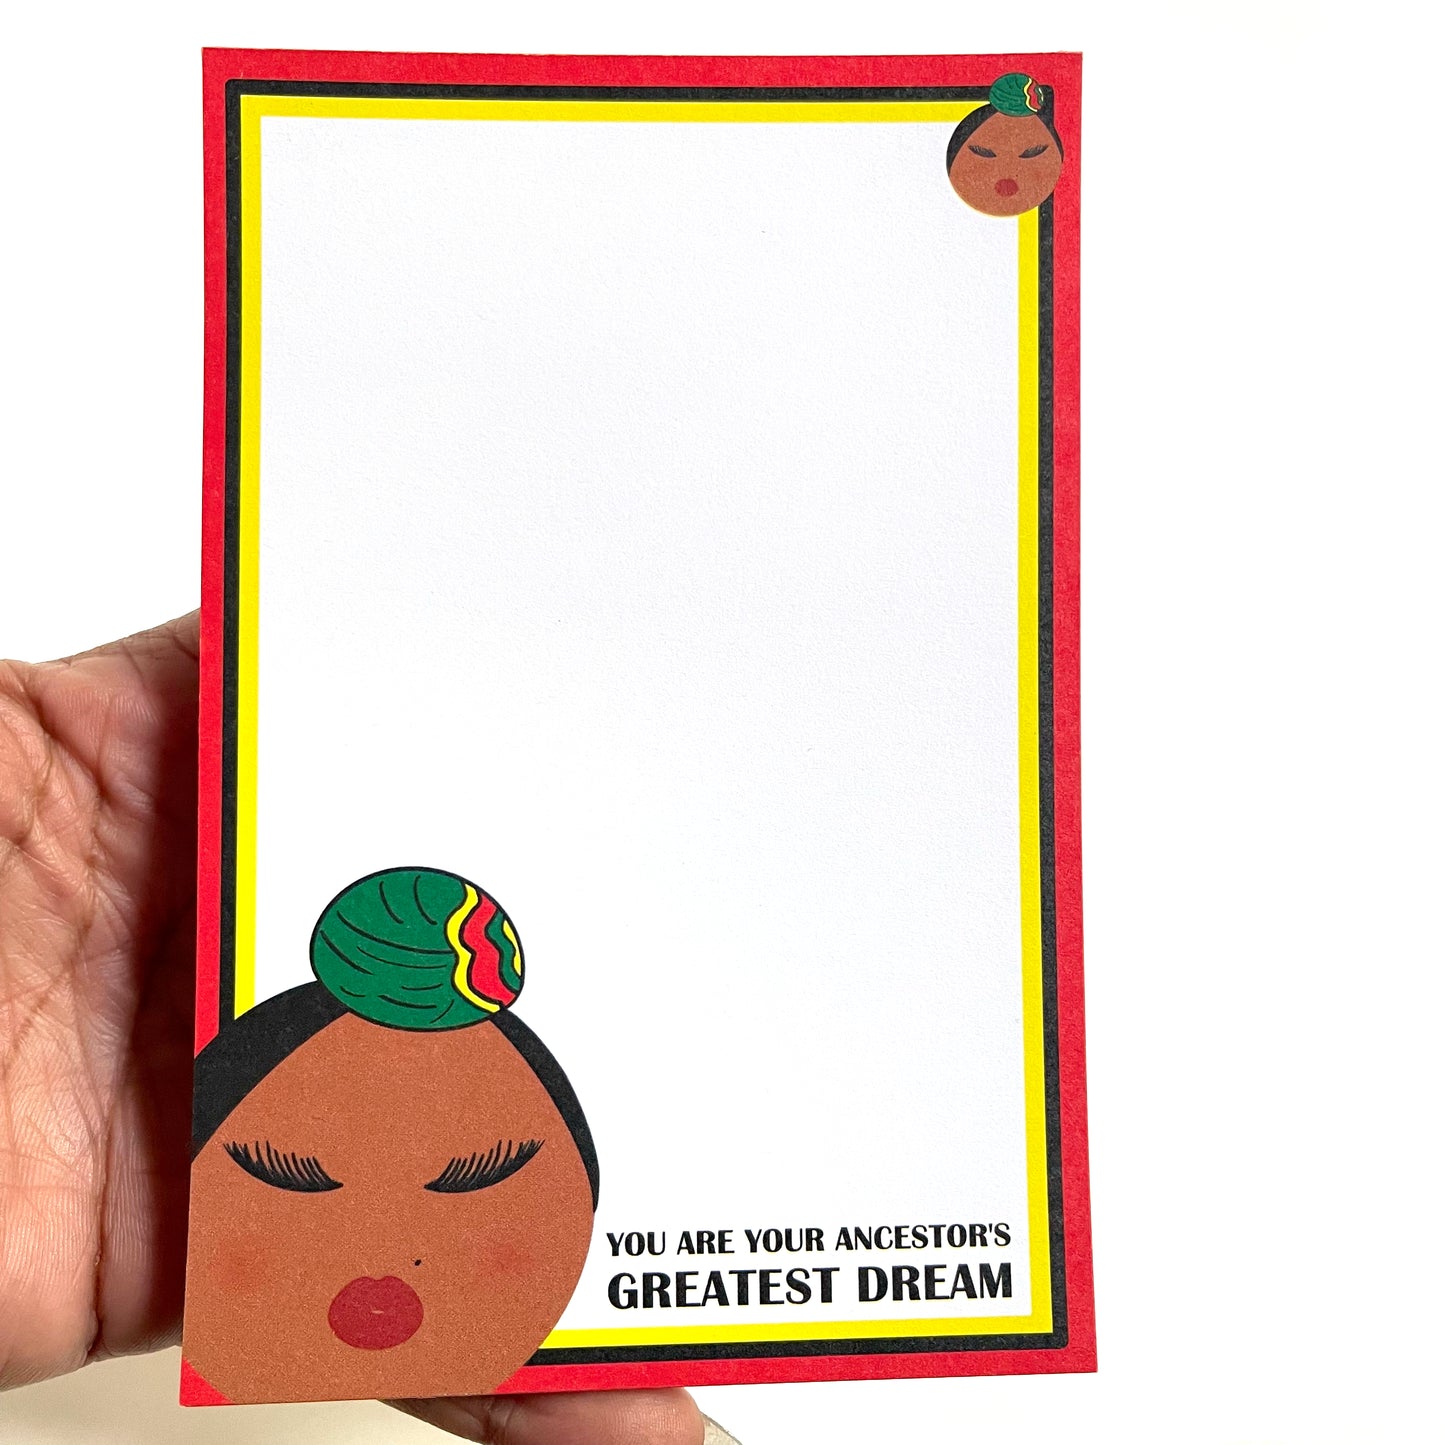 Ivy, 'You Are Your Ancestor's Greatest Dream' Memo Notepad